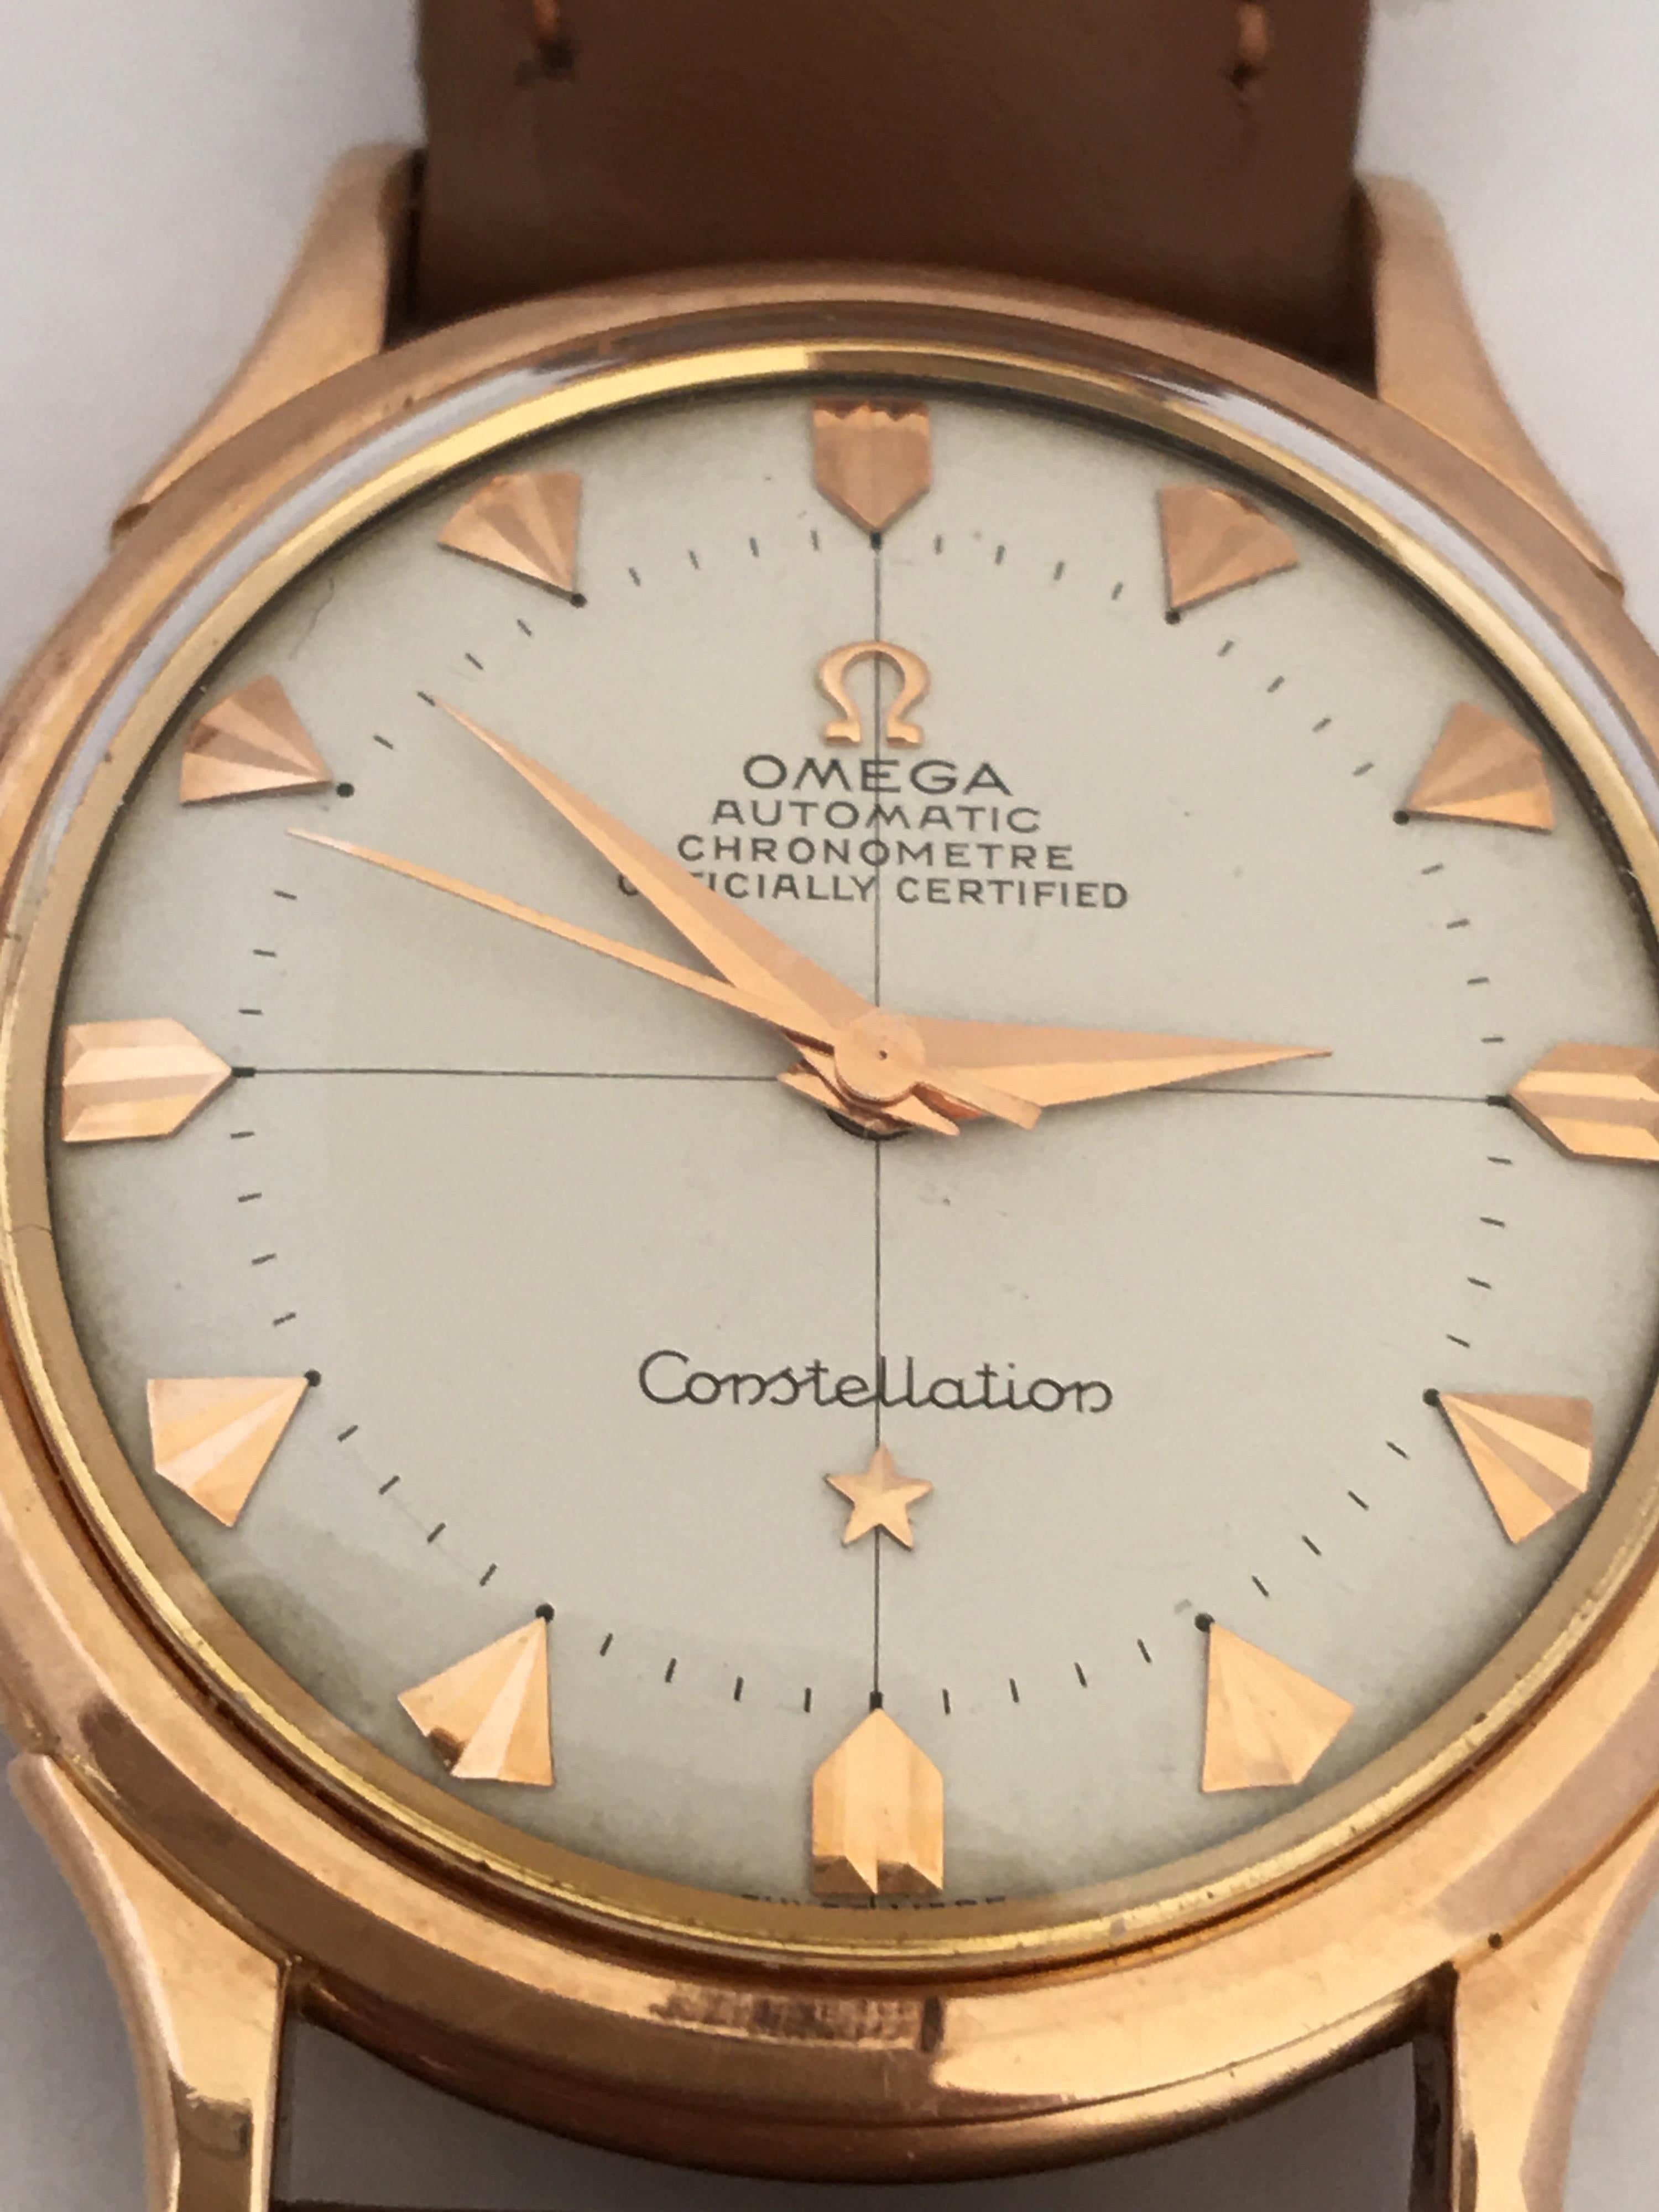 This Classic & Elegant Excellent Quality  Pre-own 18K Rose Gold Watch is in good Working condition and it runs well. It comes with a presentation Box.

Please study the images carefully carefully as form part of the description.

Notes;
The vintage